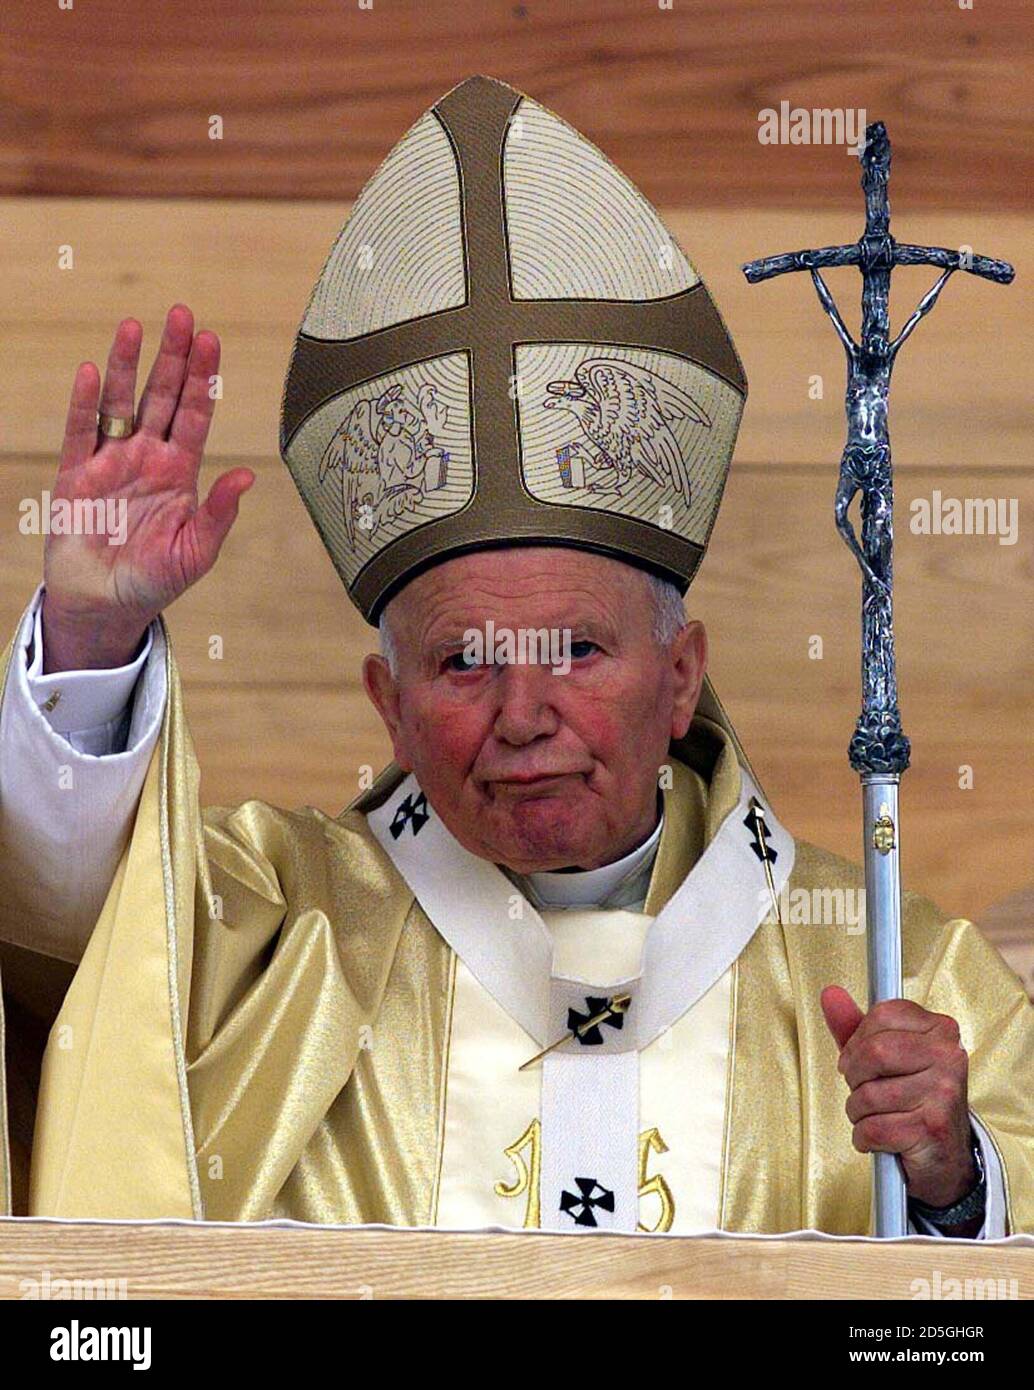 Pope John Paul II greets pilgrims in the city of Stary Sacz in southern  Poland, June 16. The 79-year-old Polish-born Pontiff was not able to lead a  mass in Krakow and Glivice